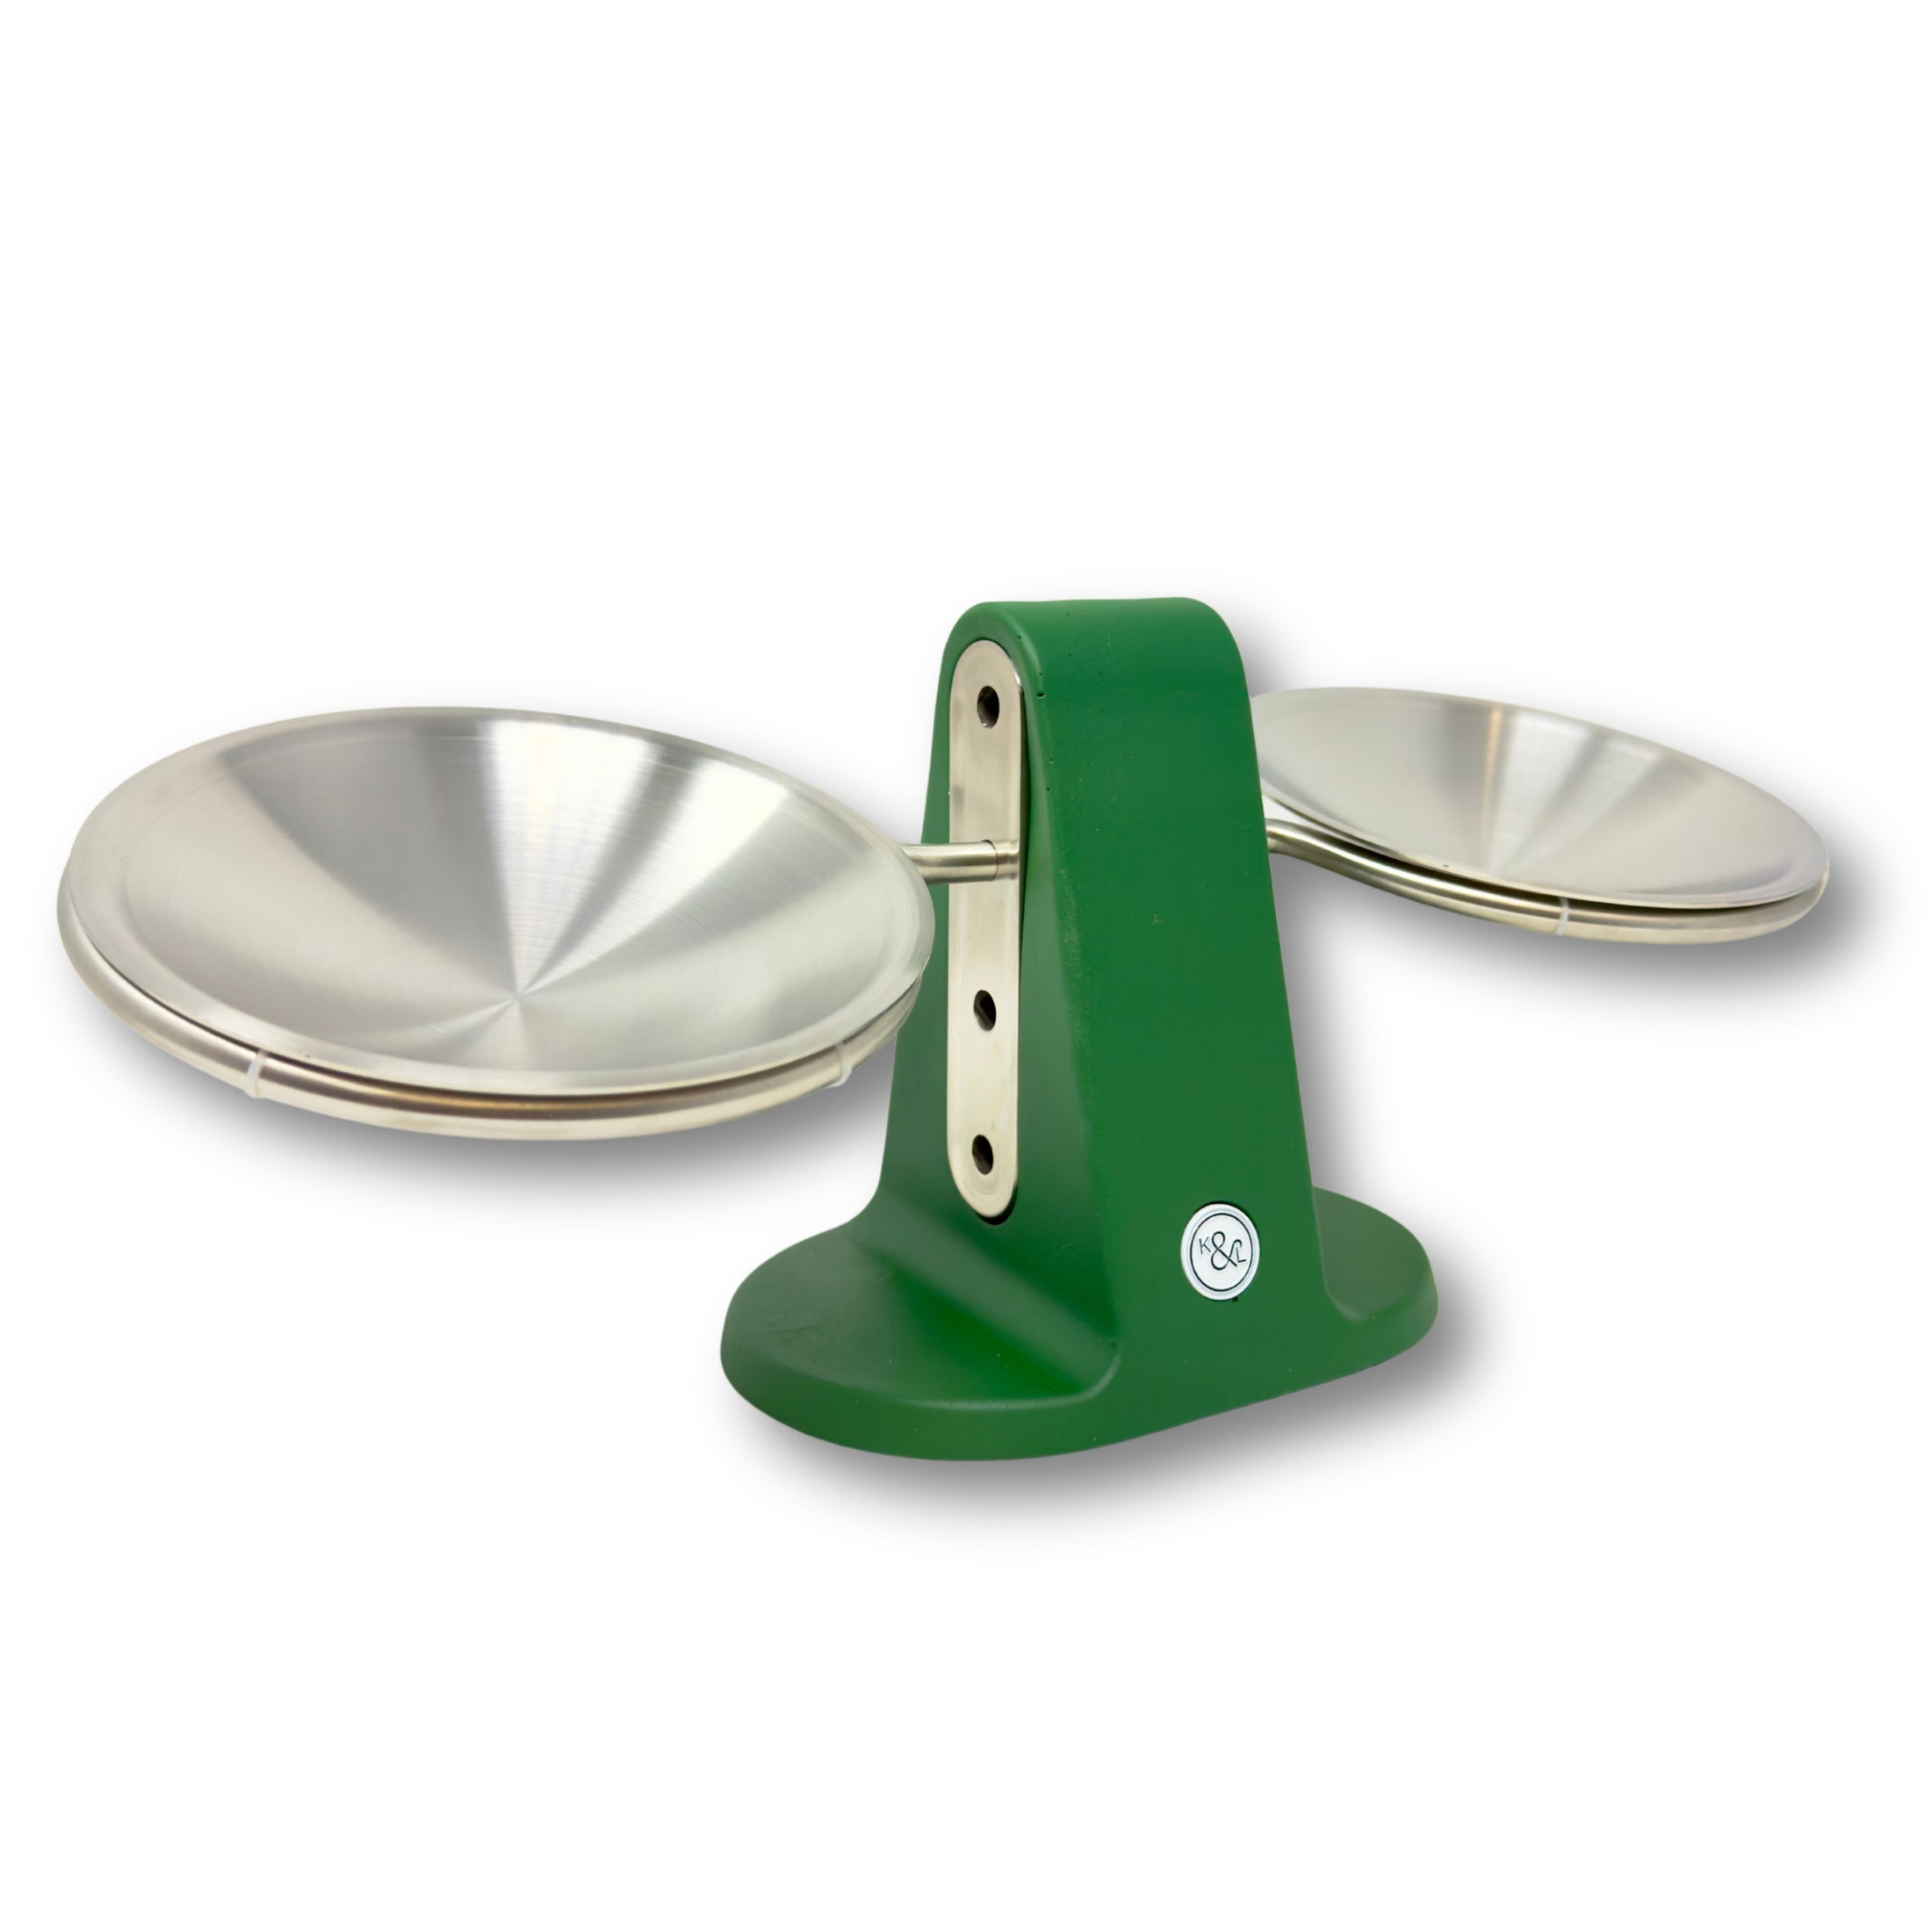 Dine Height Adjustable Cat Food Bowl Racing Green and Silver